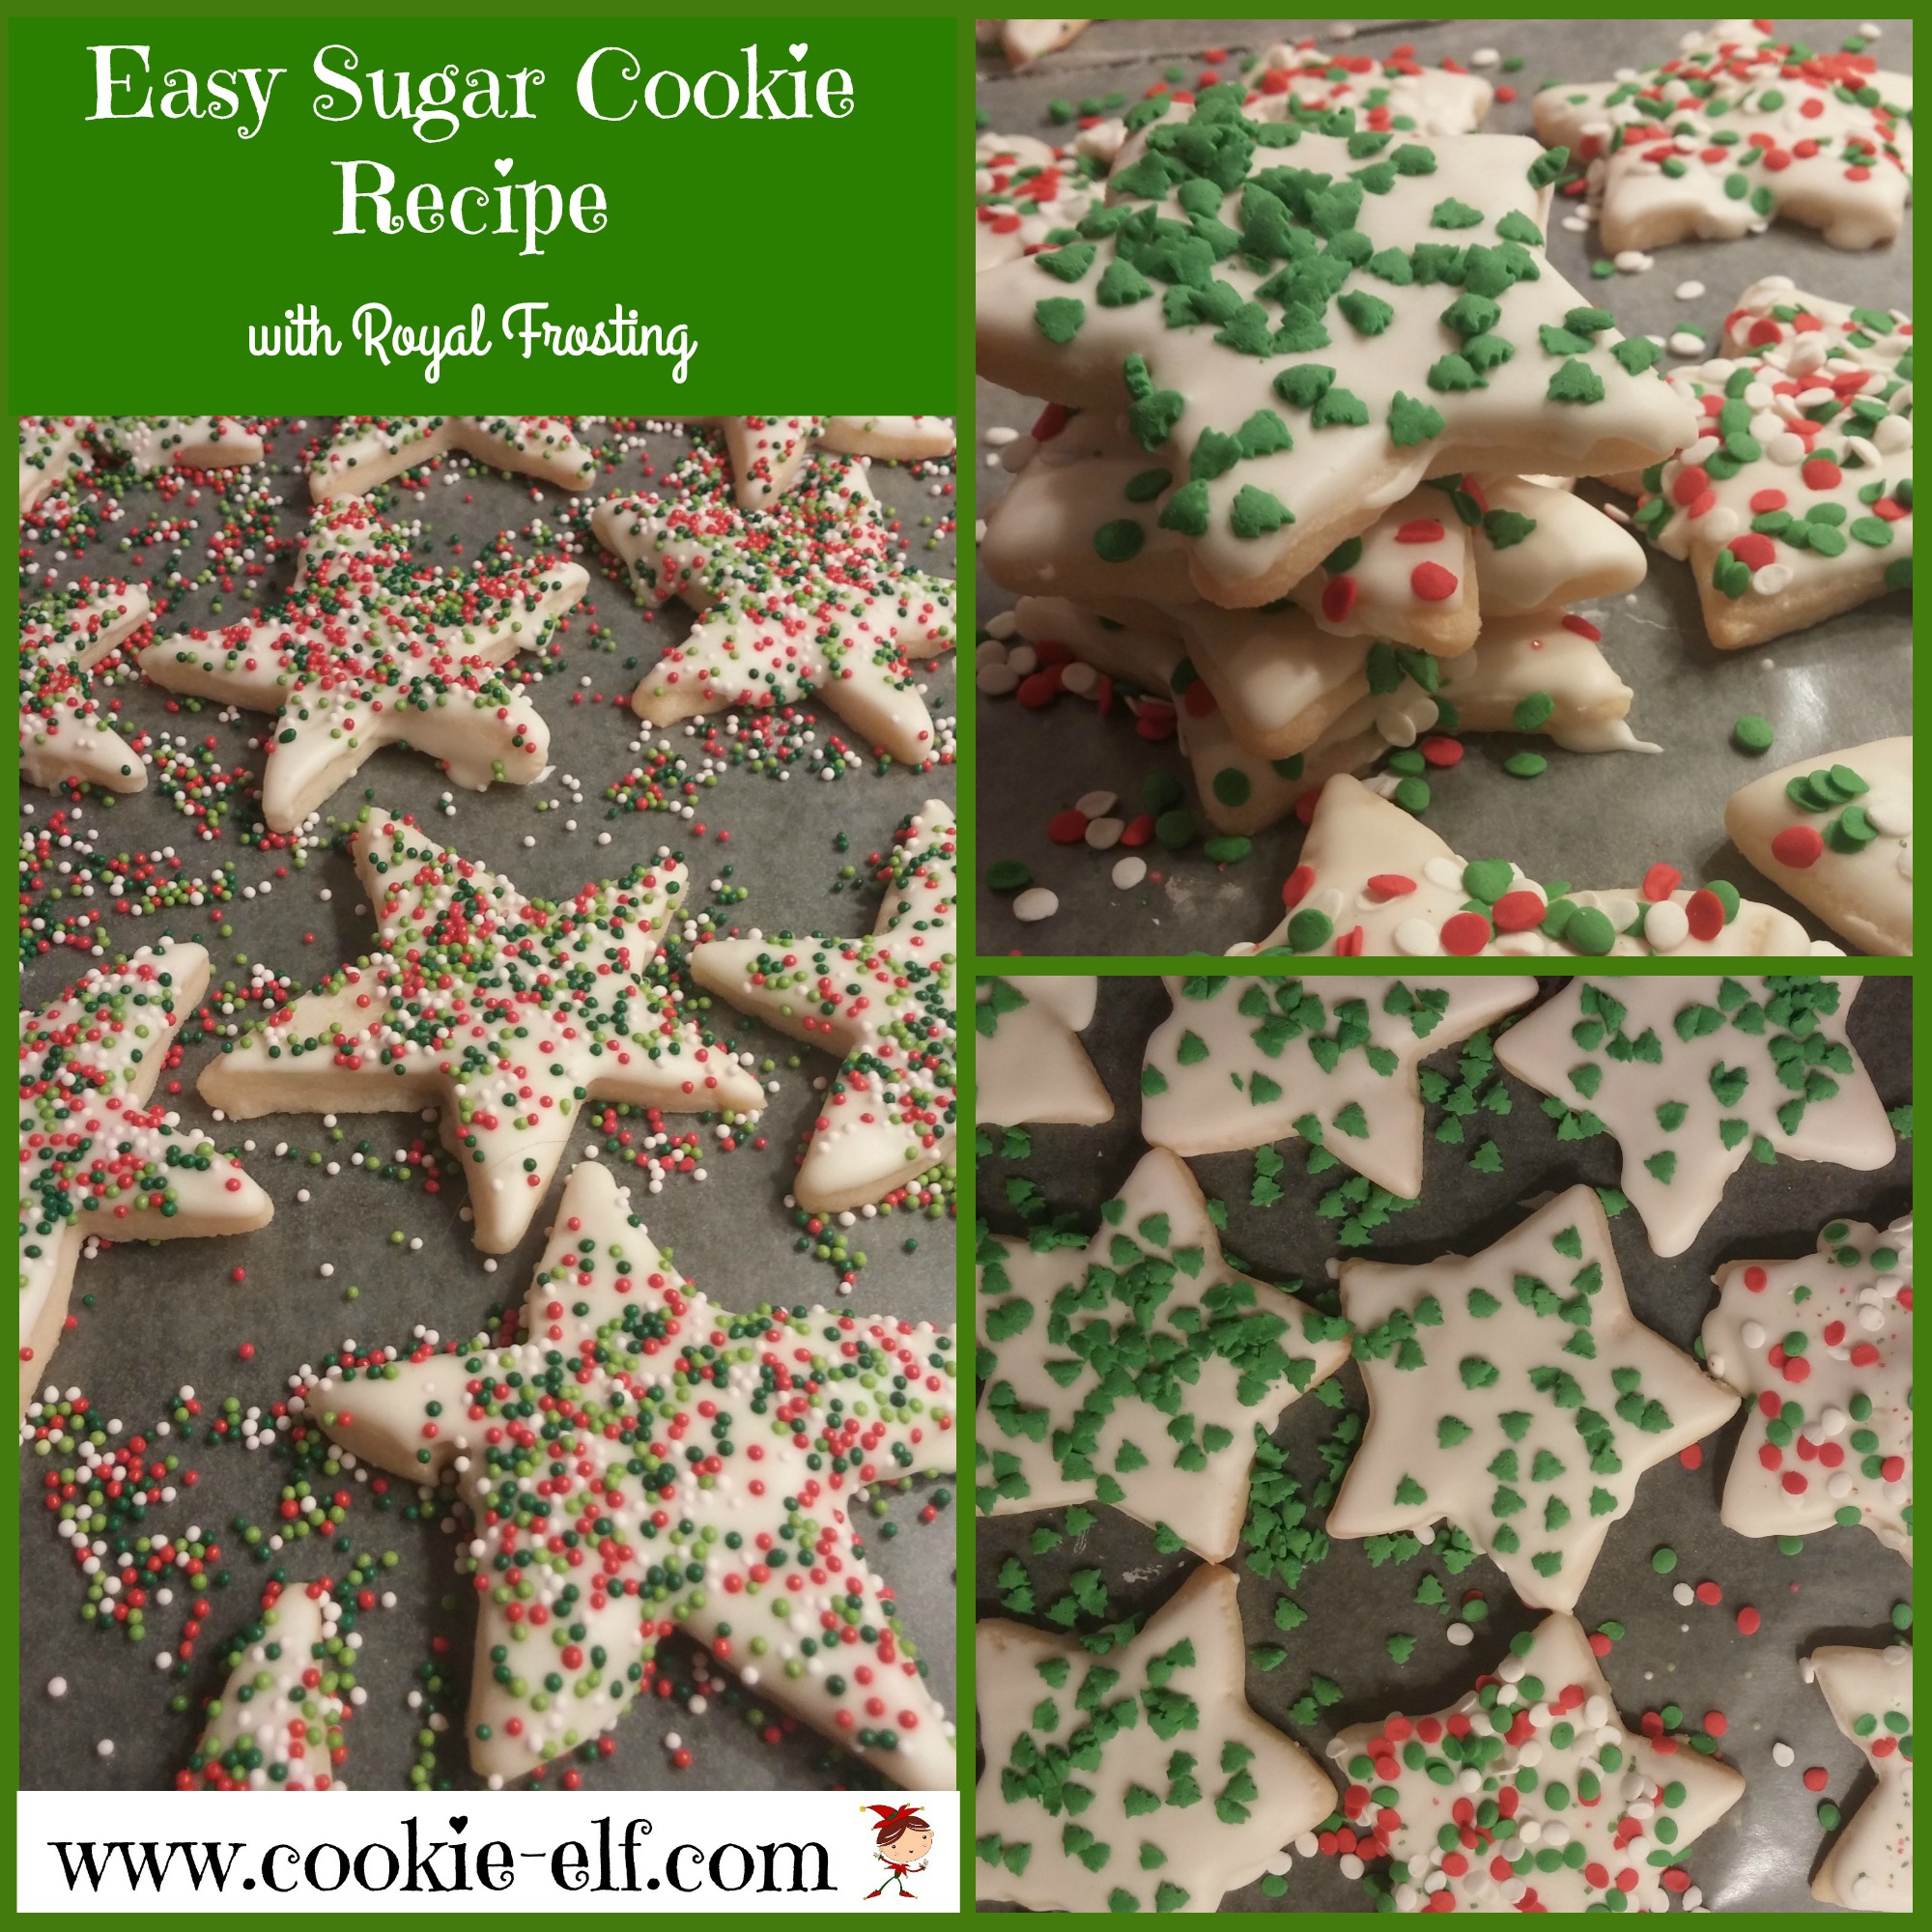 Easy Sugar Cookie Recipe with Royal Frosting from The Cookie Elf